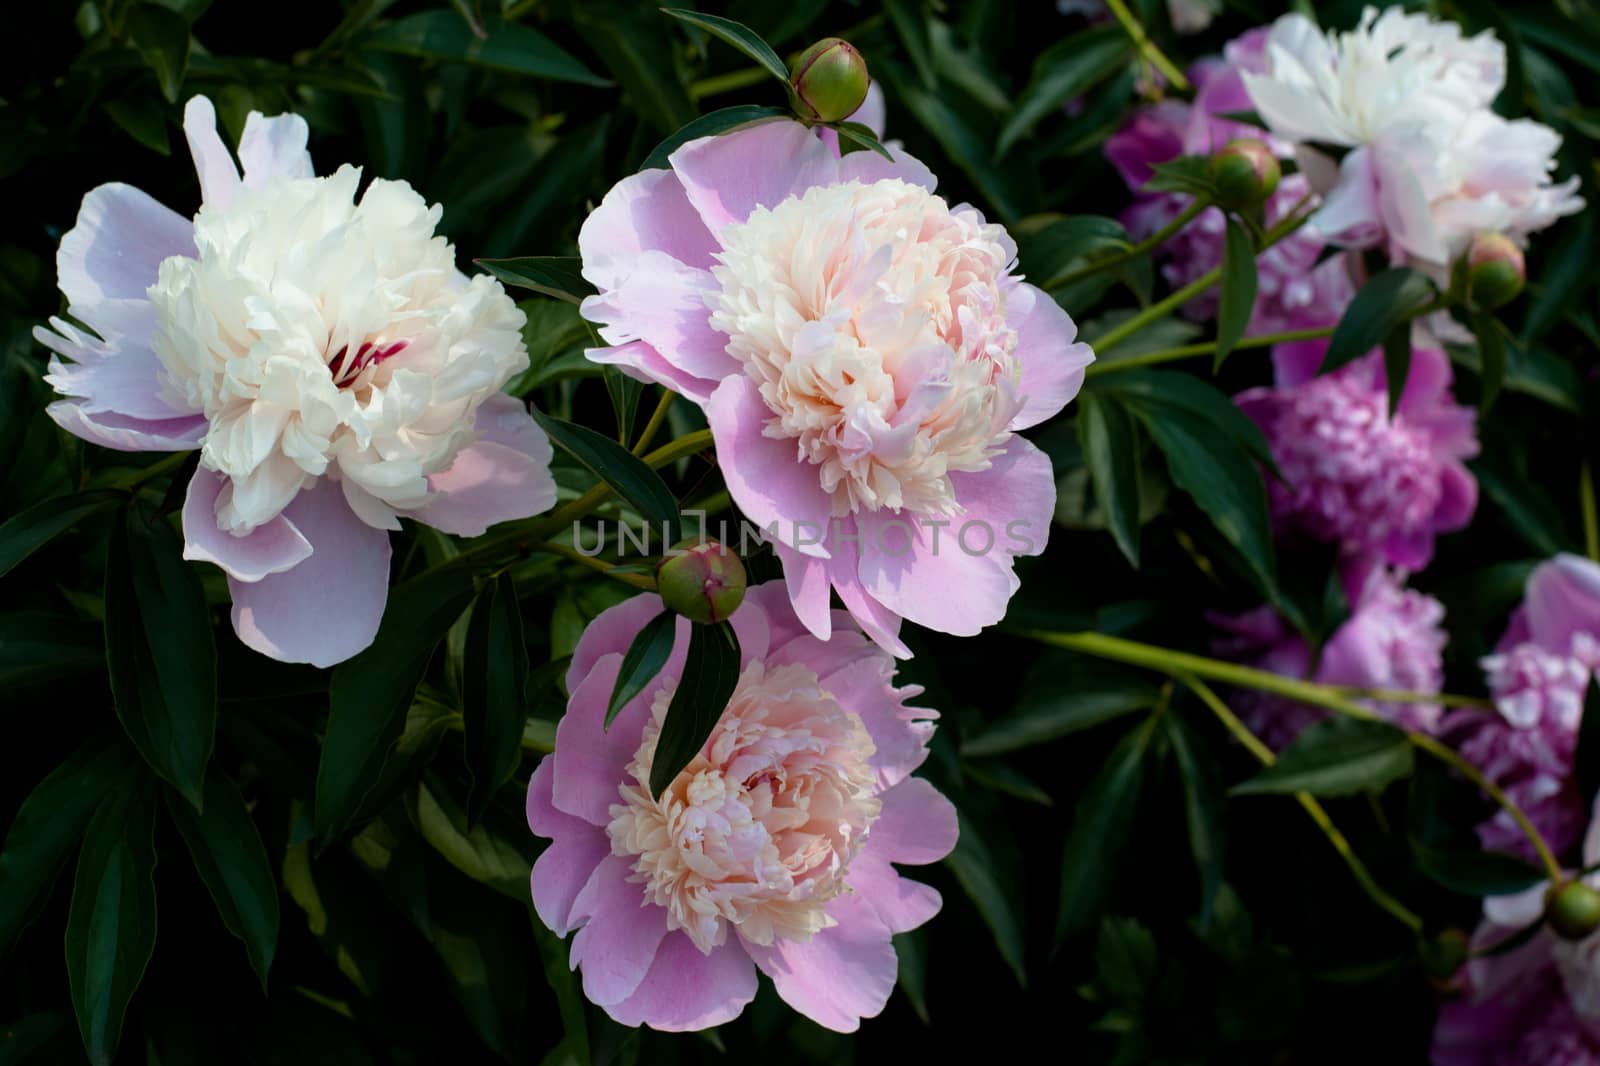 Several pink peonies in the garden
